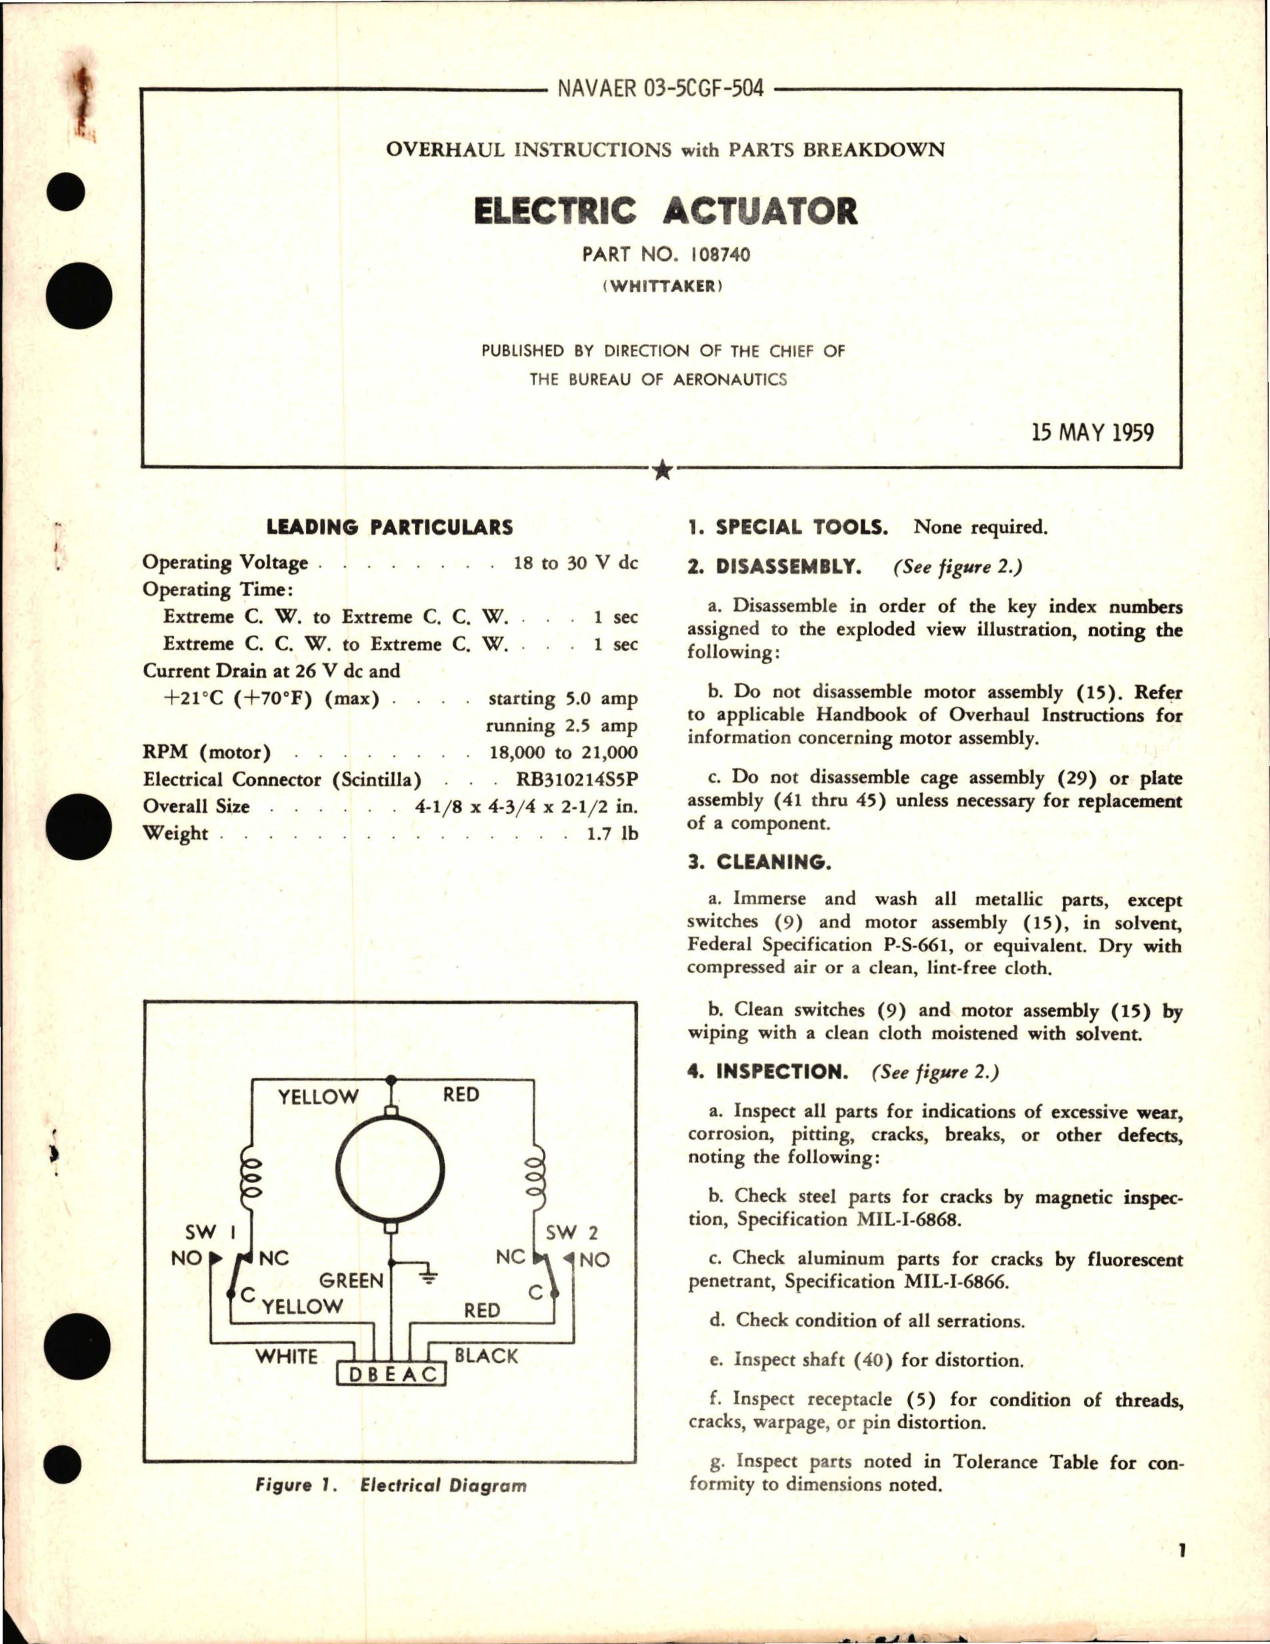 Sample page 1 from AirCorps Library document: Overhaul Instructions with Parts Breakdown for Electric Actuator - Part 108740 